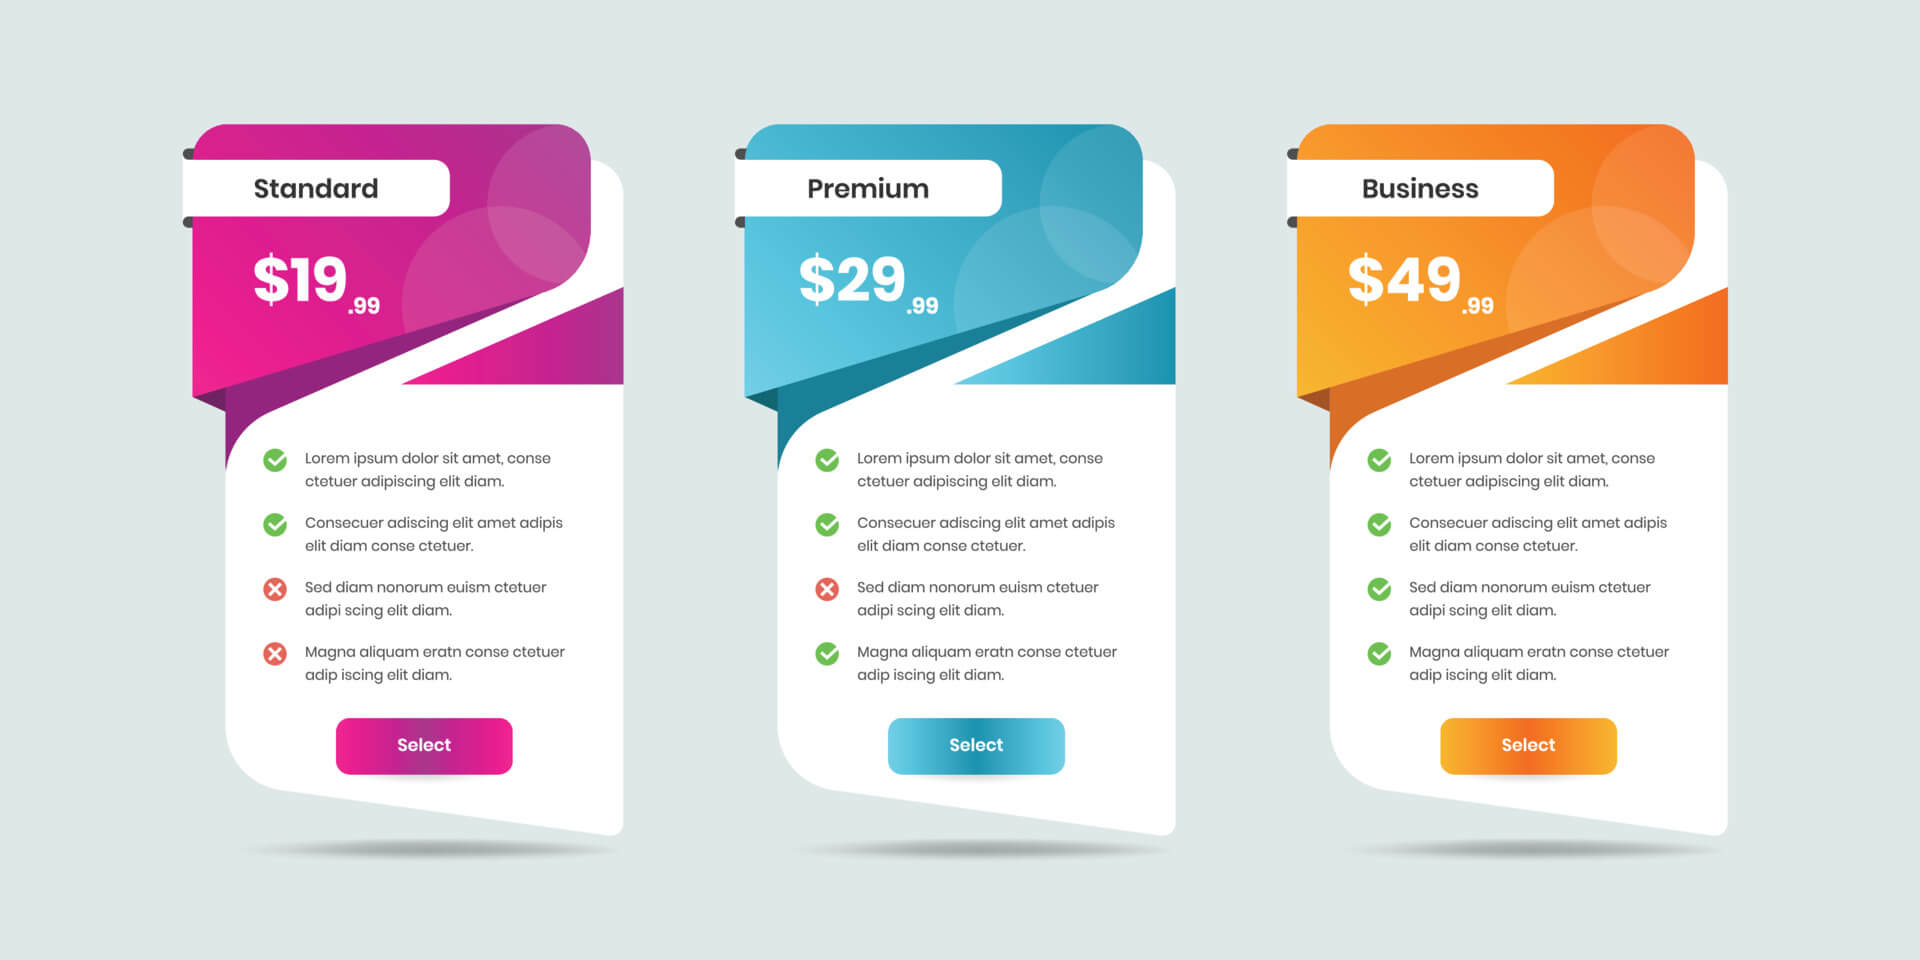 SaaS Business Model - Subscription Pricing